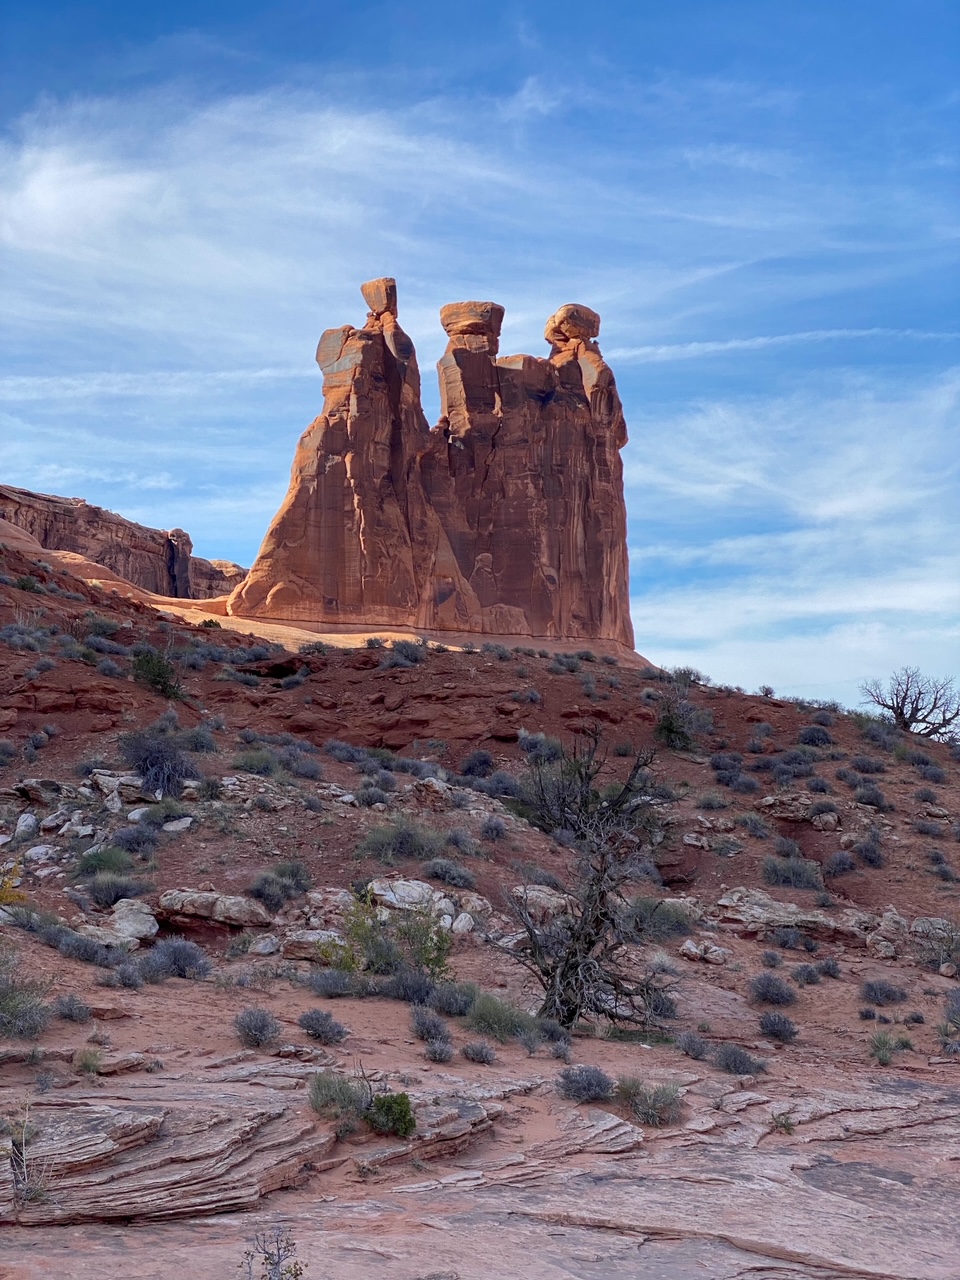 The Three Gossips on the Park Avenue Trail